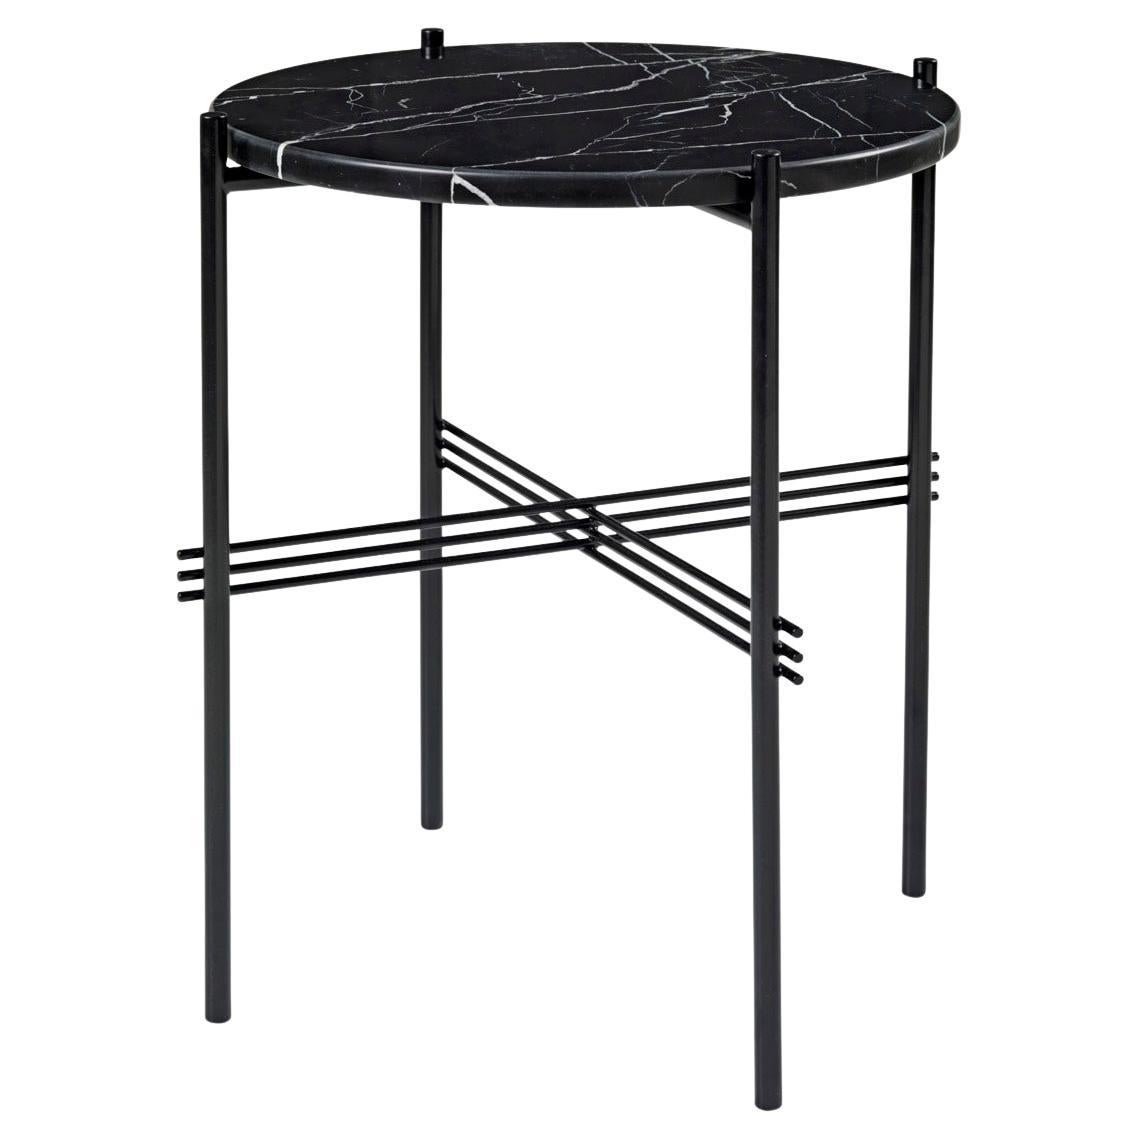 TS Side Table Round, Black Base / Black Marquina Marble, by GamFratesi for Gubi